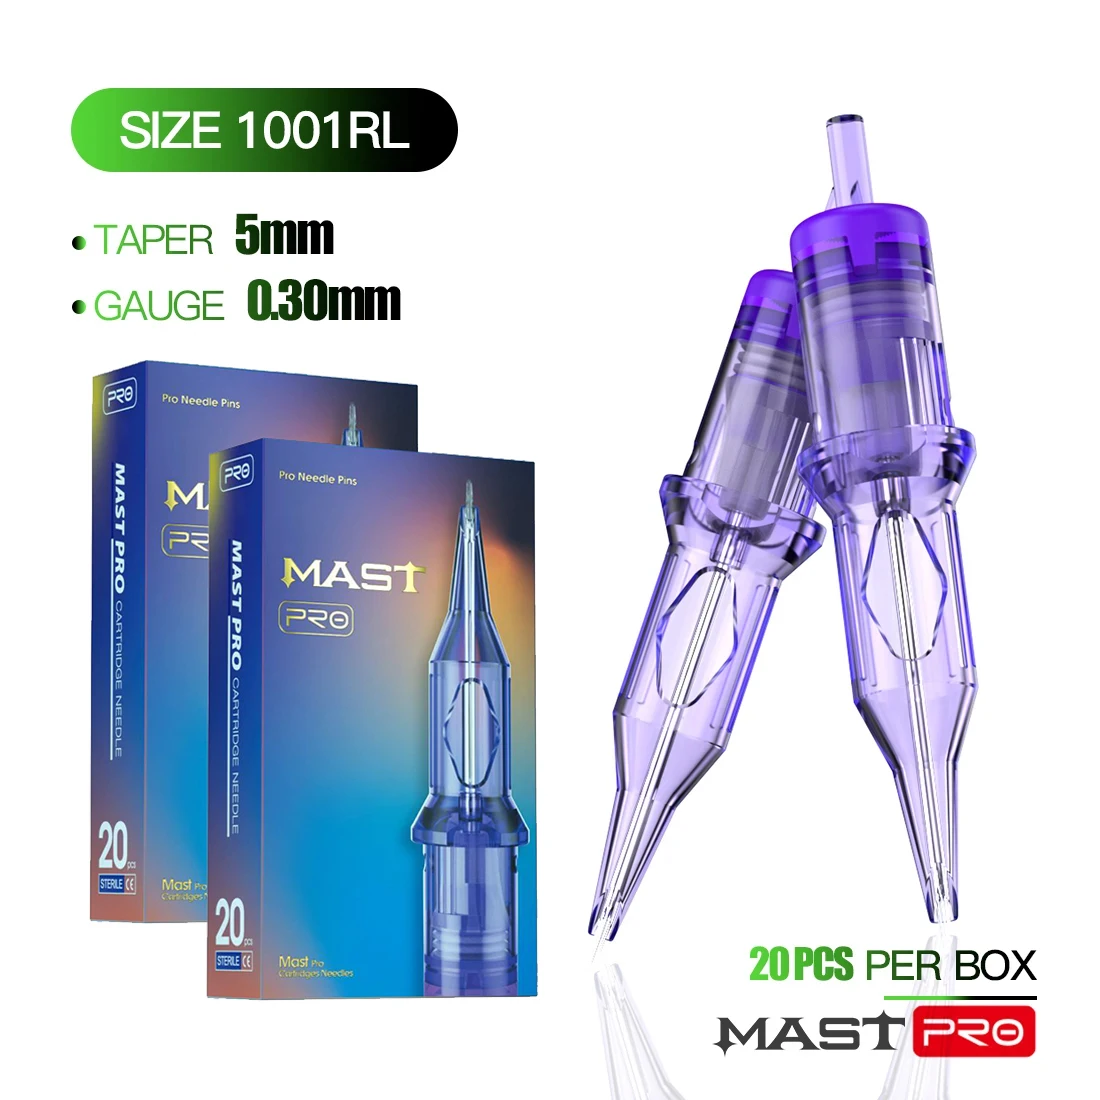 Mast Pro Disposable Box of 20pcs Sterile Tattoo Needles Cartridge for Tattoo Rotary Pen Round Liner Tattoo Supplies Makeup